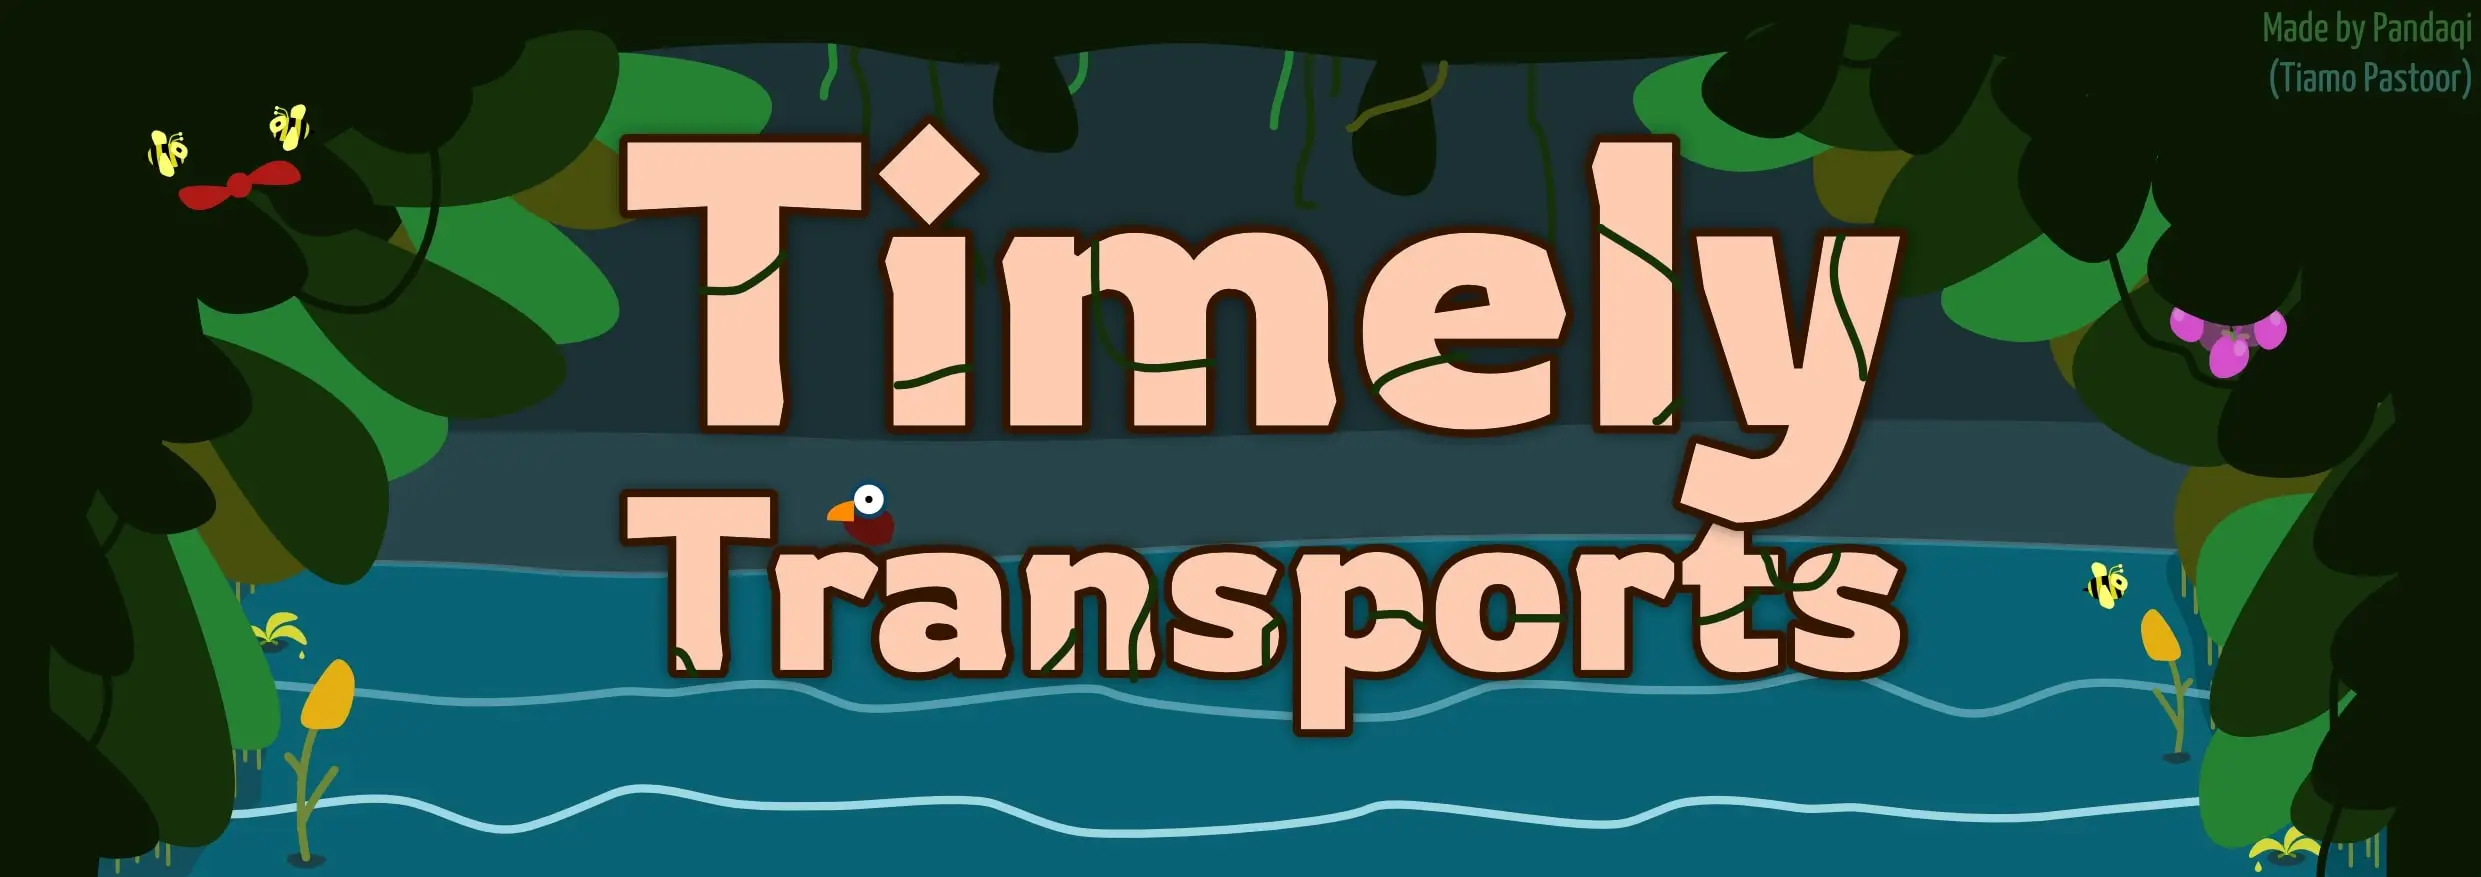 Thumbnail / Header for article: Timely Transports (Part 1)